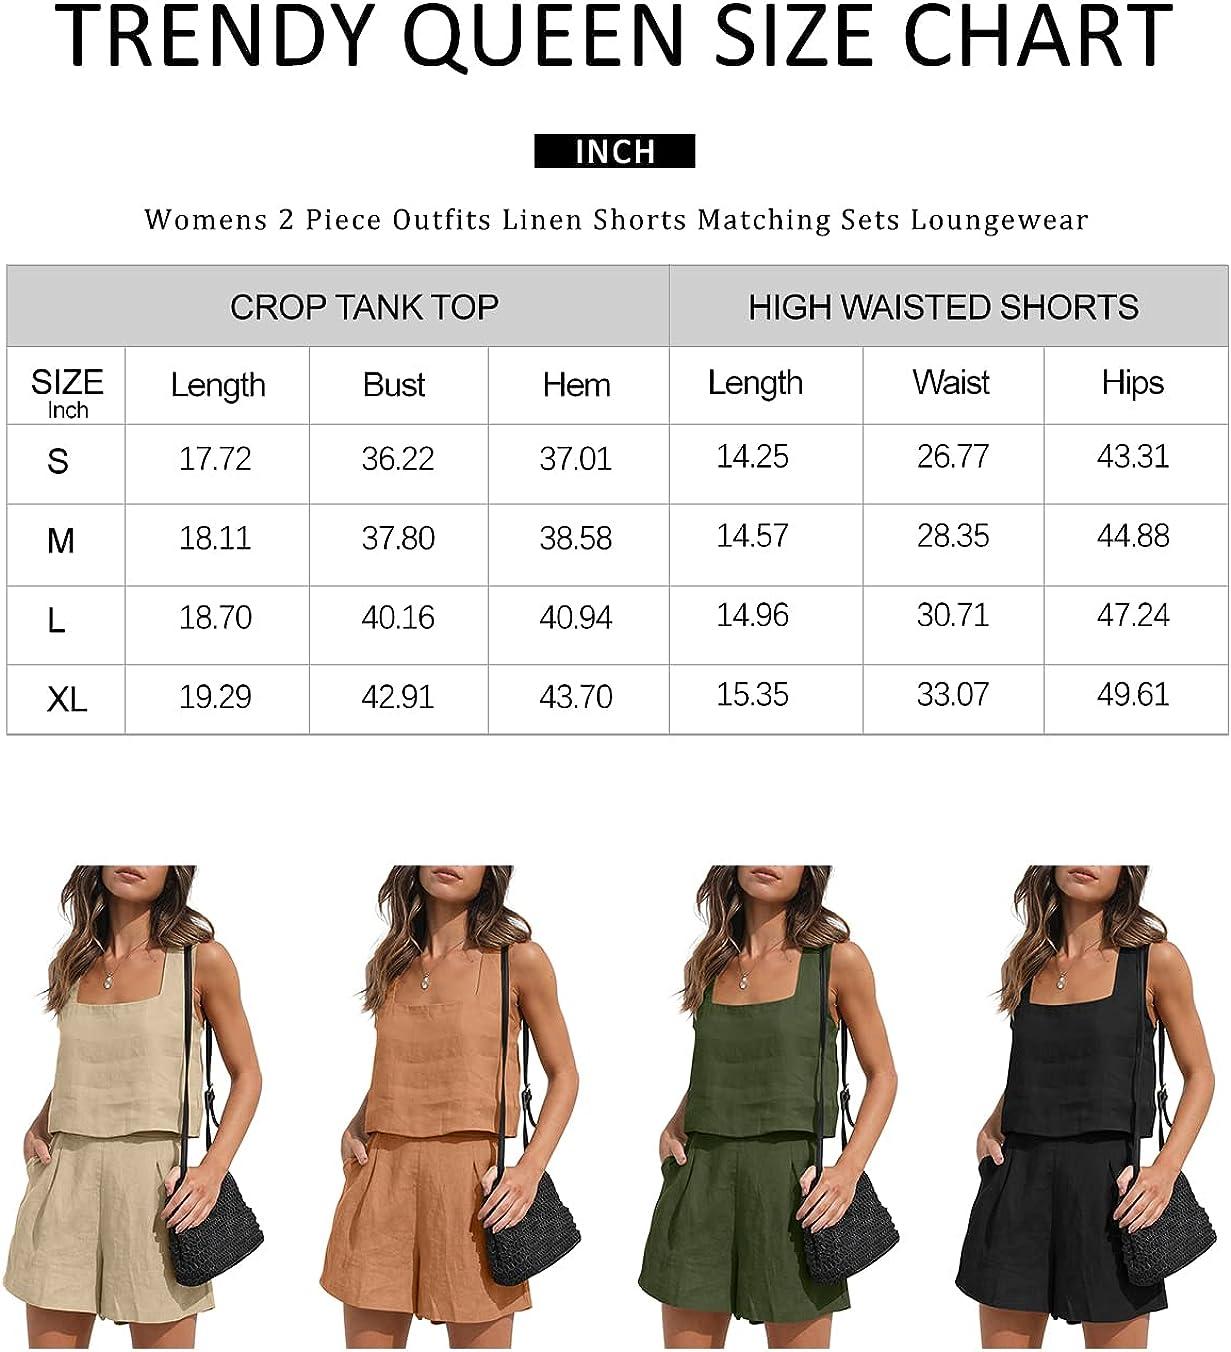 Buy Trendy Queen Two Piece Outfits Women Summer Shorts Sets 2 Piece  Sleeveless Matching Lounge Crop Top and High Waisted Shorts, Black, Medium  at